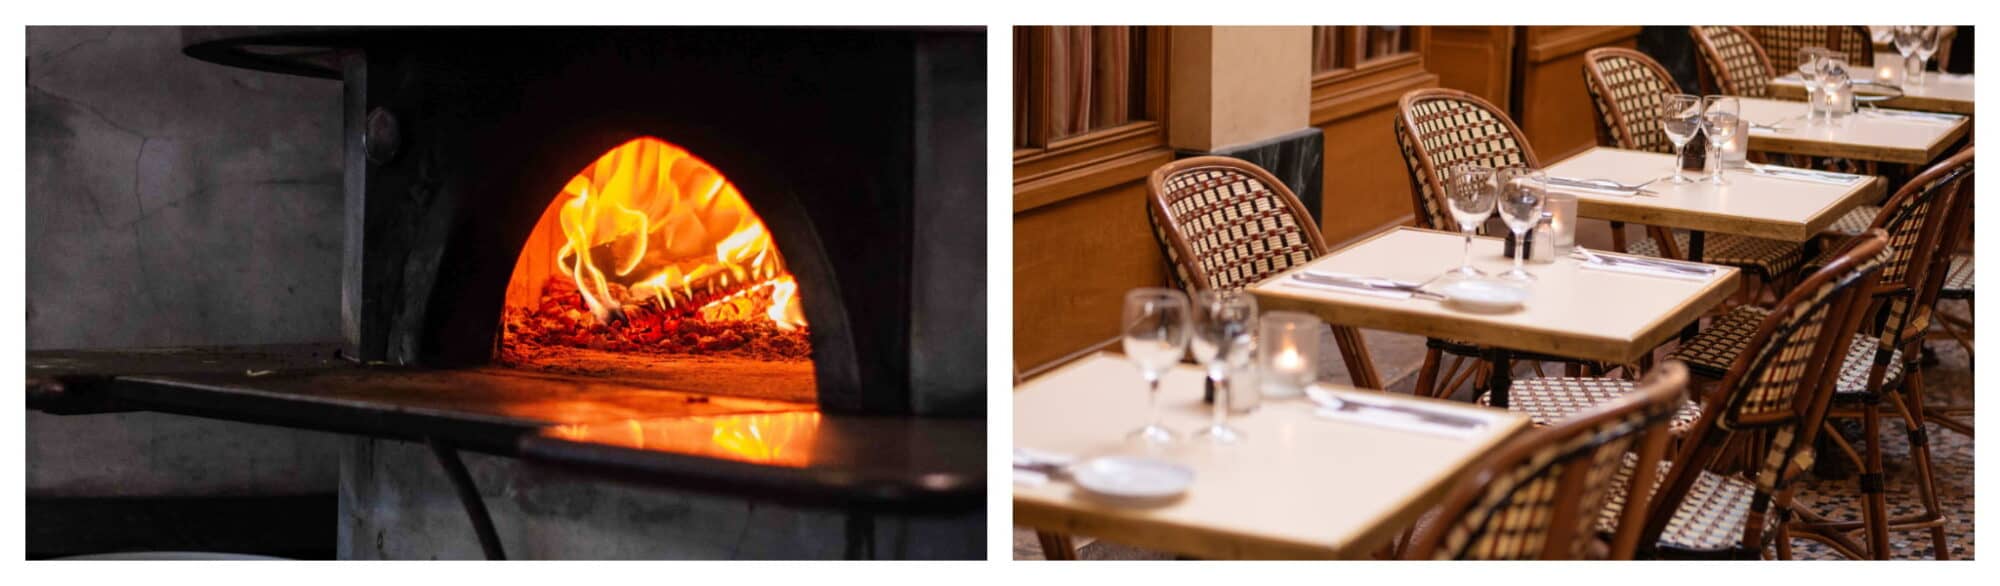 Left pizza oven in an italian restaurant, right Parisian cafe chairs